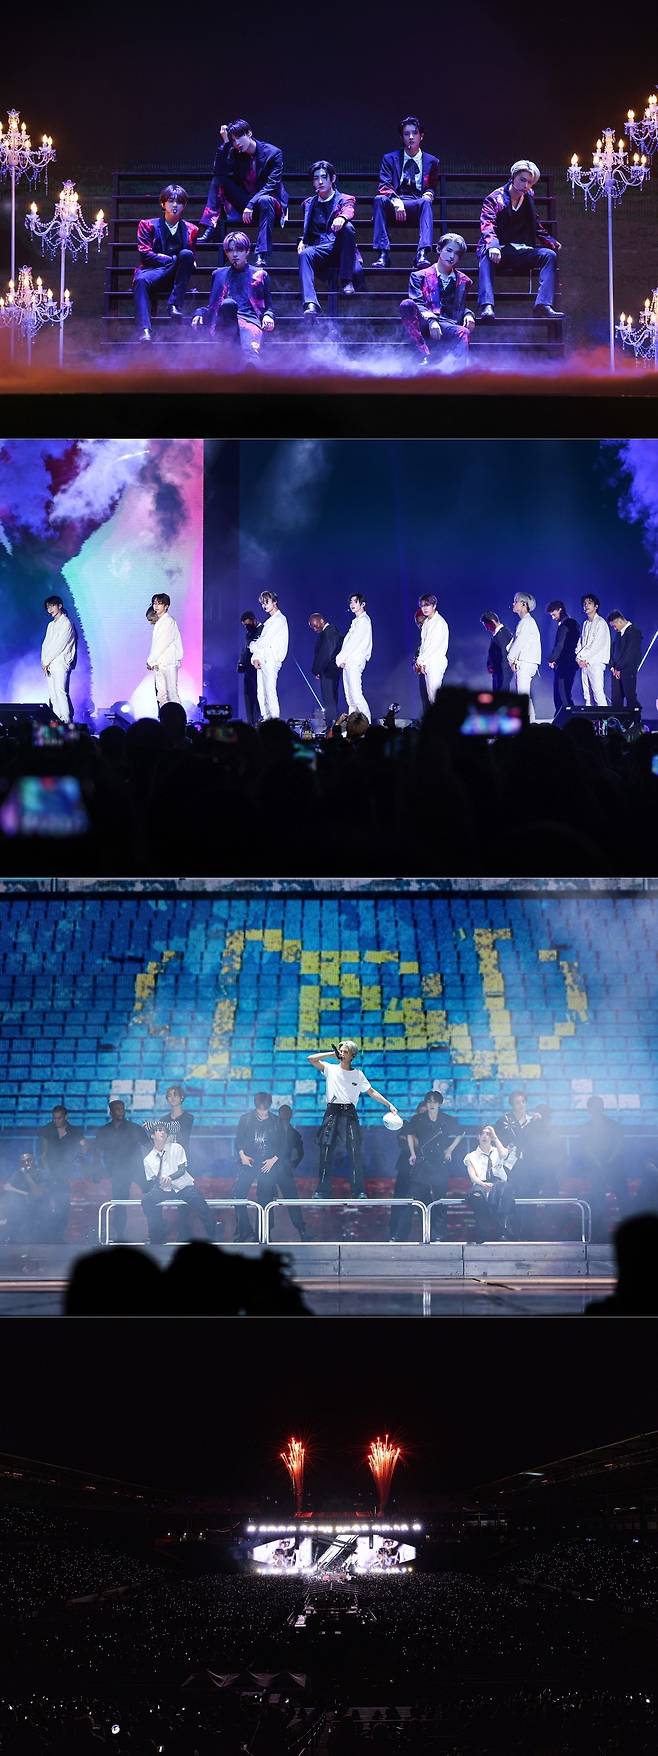 The group ENHYPEN kicked off its grand United States of America tour with its first solo performance at AT&T Stadium since its debut.On October 6 (local time), En Hyphen (Jung Won, Hee Seung, Jay, Jake, Sung Hoon, Sunwoo, Nikki) held the World Tour  ⁇ ENHYPEN WORLD TOUR  ⁇ FATE ⁇  at the United States of America Los Angeles Dignity Health Sports Park.The performance on this day was special from Opening!, where the hyphen appeared on stage in a mysterious and grand mood.Starting with Jake, the members took the stage one by one, and finally, when Sung Hoon took off his silver mask, about 22,500 fans who filled the AT&T Stadium cheered explosively in the intense Opening!The hyphen is the main title song of the album released in the past, such as  ⁇  Drunk-Dazed  ⁇ ,  ⁇  Future Perfect (Pass the MIC)  ⁇ ,  ⁇  Blessed-Cursed  ⁇ ,  ⁇  Tamed-Dashed  ⁇ ,  ⁇  Bite Me  ⁇  .They were then replaced by a lock-buster (as in the action movie), an act of assassination, an act of assassination, an act of assassination, an act of assassination, an act of assassination, an act of assassination, an act of assassination, an act of assassination, an act of assassination, an act of assassination, an act of assassination, an act of assassination, an act of assassination, an act of assassination, an act of assassination, an act of assassination, an act of assassination, an act of assassination, an act of assassination, an act of assassination, an act of assassination, an act of assassination, an act of assassination, an act of assassination, an act of assassination, an act of assassination, an act of assassination, an act of assassination, an act of assassination, an act of assassination, an act of assassination, an act of assassination, an act of It boasted a sweet tone.The set list of 24 songs was enough to reveal the colorful music color of the hyphen.Even though it was a wide performance field called AT & T Stadium, the hyphen actively breathed with the fans.They sang  ⁇ Polaroid Love ⁇  and went around the audience to meet the audience one by one, and fans responded with cheering rod surfing, creating a spectacular scene where the hyphen and engine (ENGENE.Fandom name) became one.I cant tell you how happy we are right now.You make me feel alive. Engine has always been grateful. I will work hard to get back to Los Angeles. Please look forward to your next album.I love the engine very much and have a great feeling about it.The hyphen will be held on the 10th at the Glendale Desert Diamond Arena to host the second FATE United States of America performance.